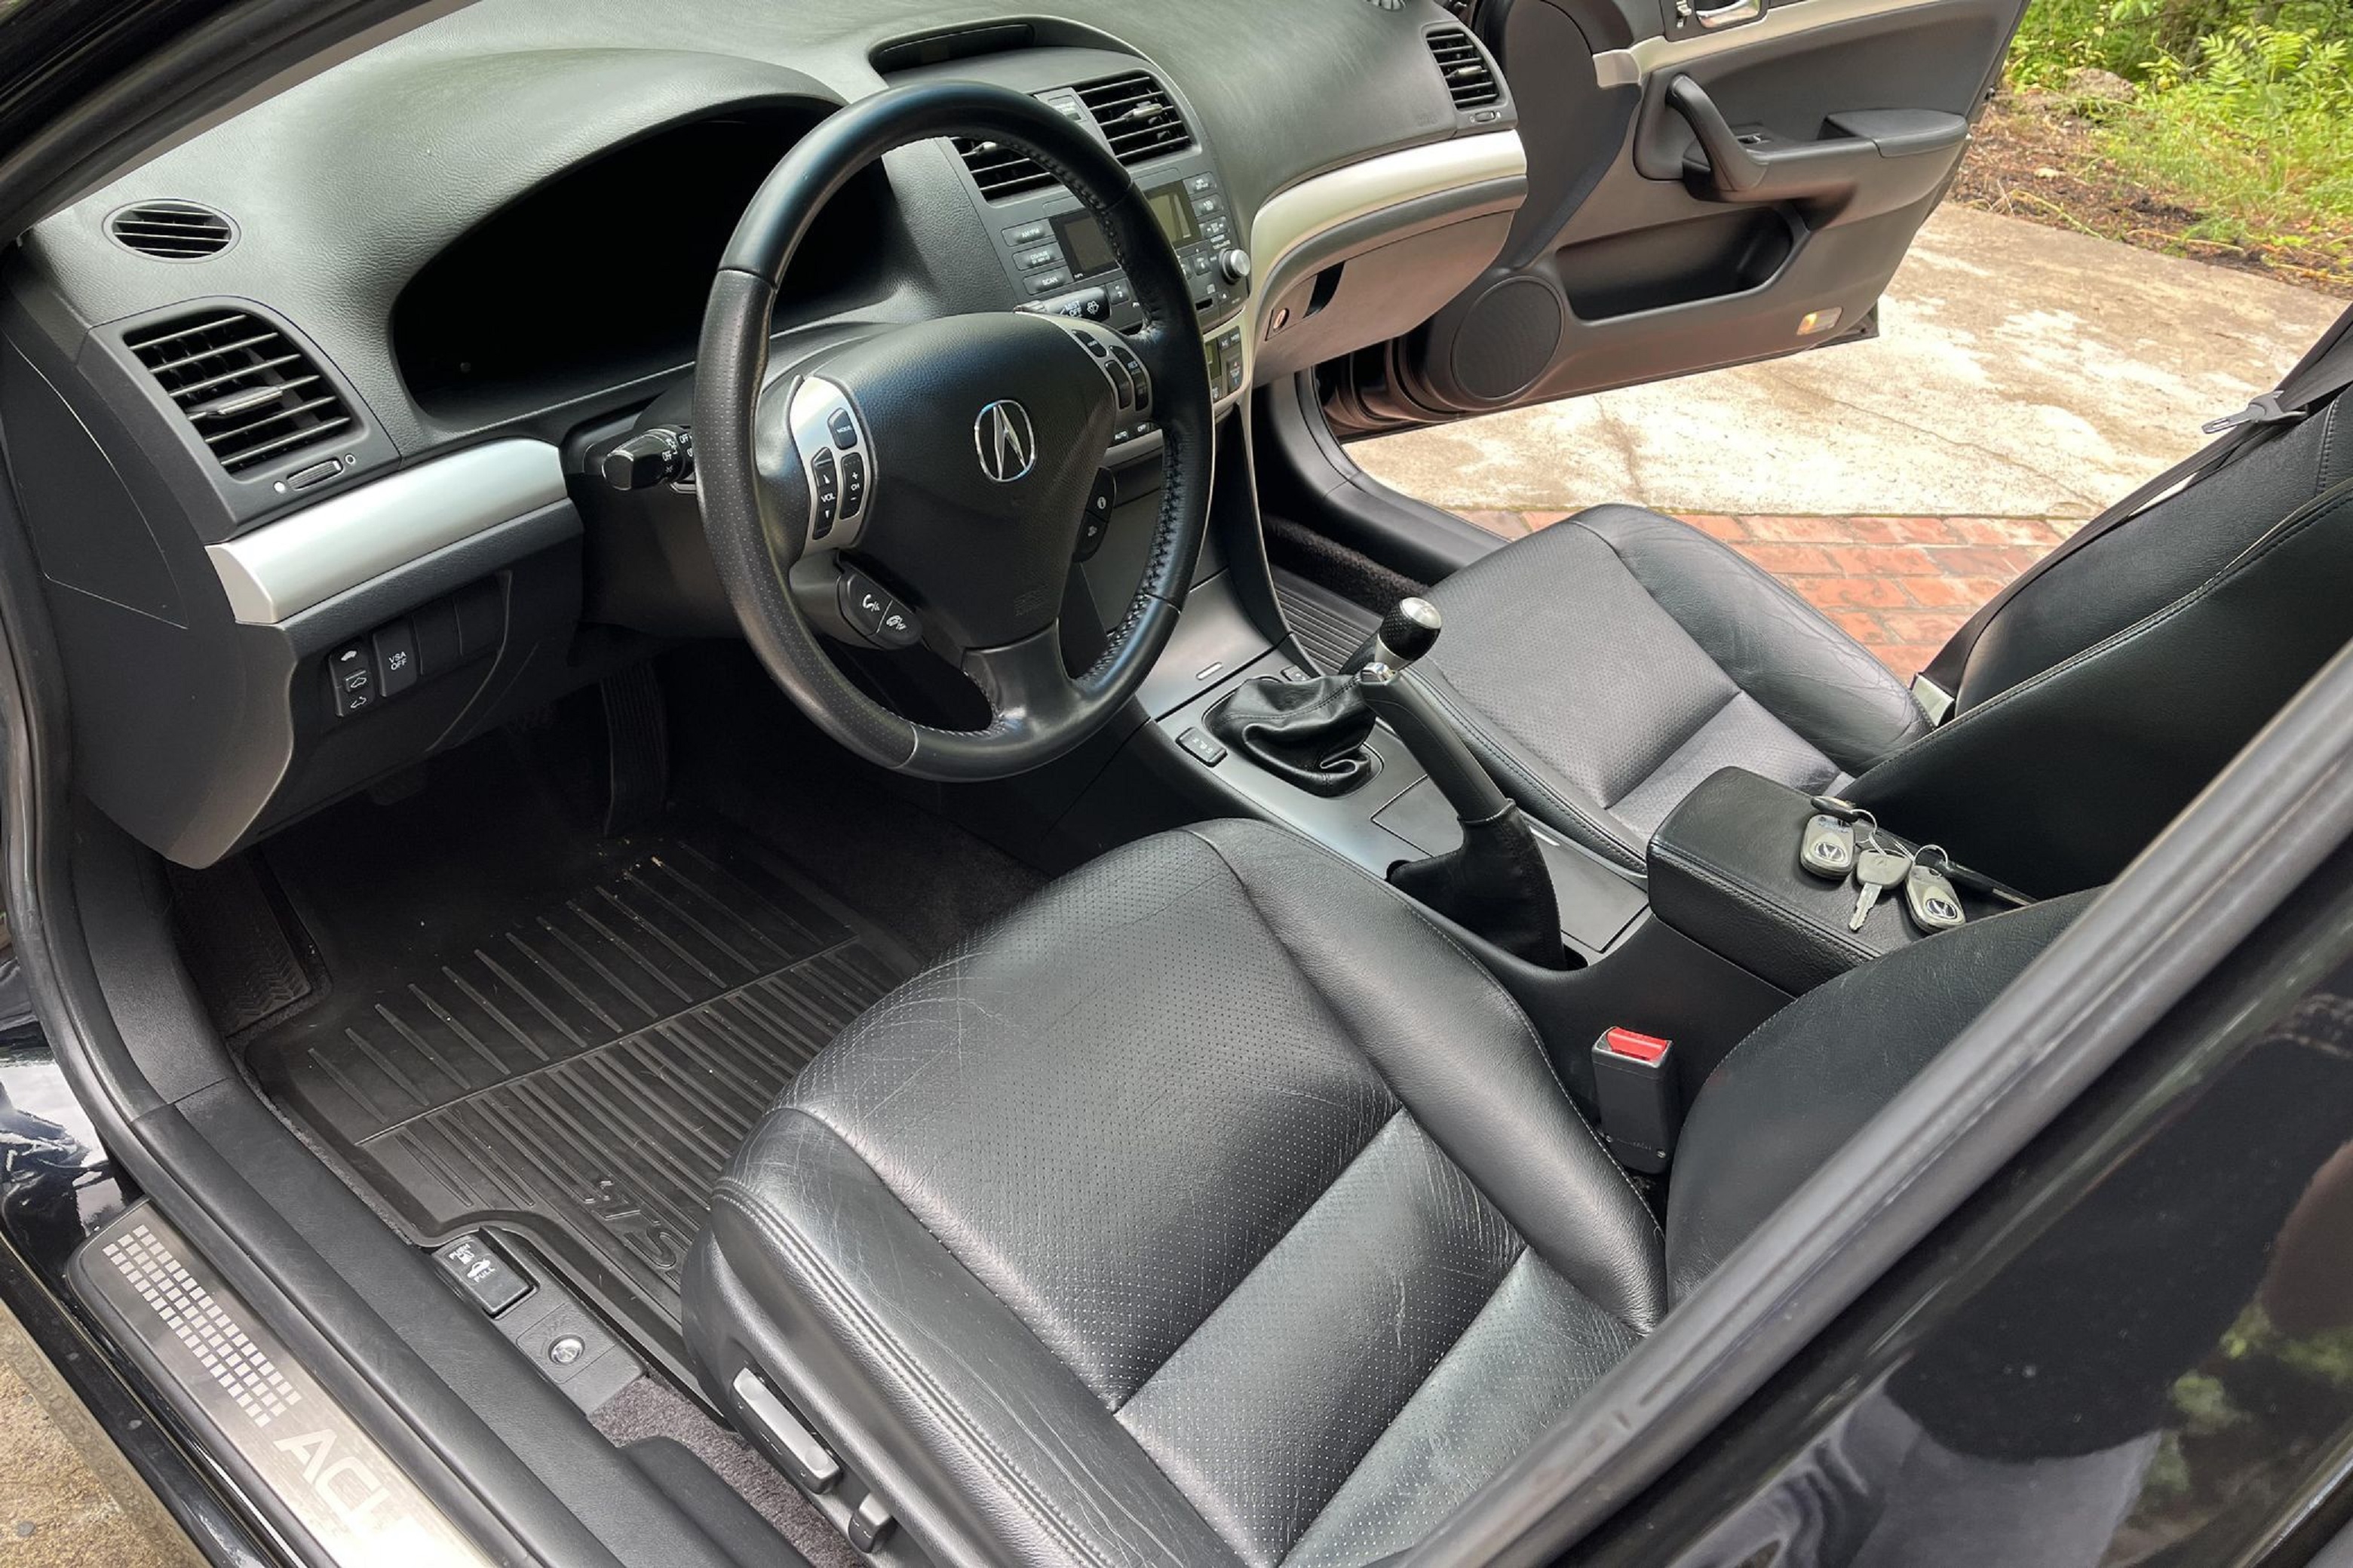 The black-leather front seats and black dashboard of a manual 2008 Acura TSX